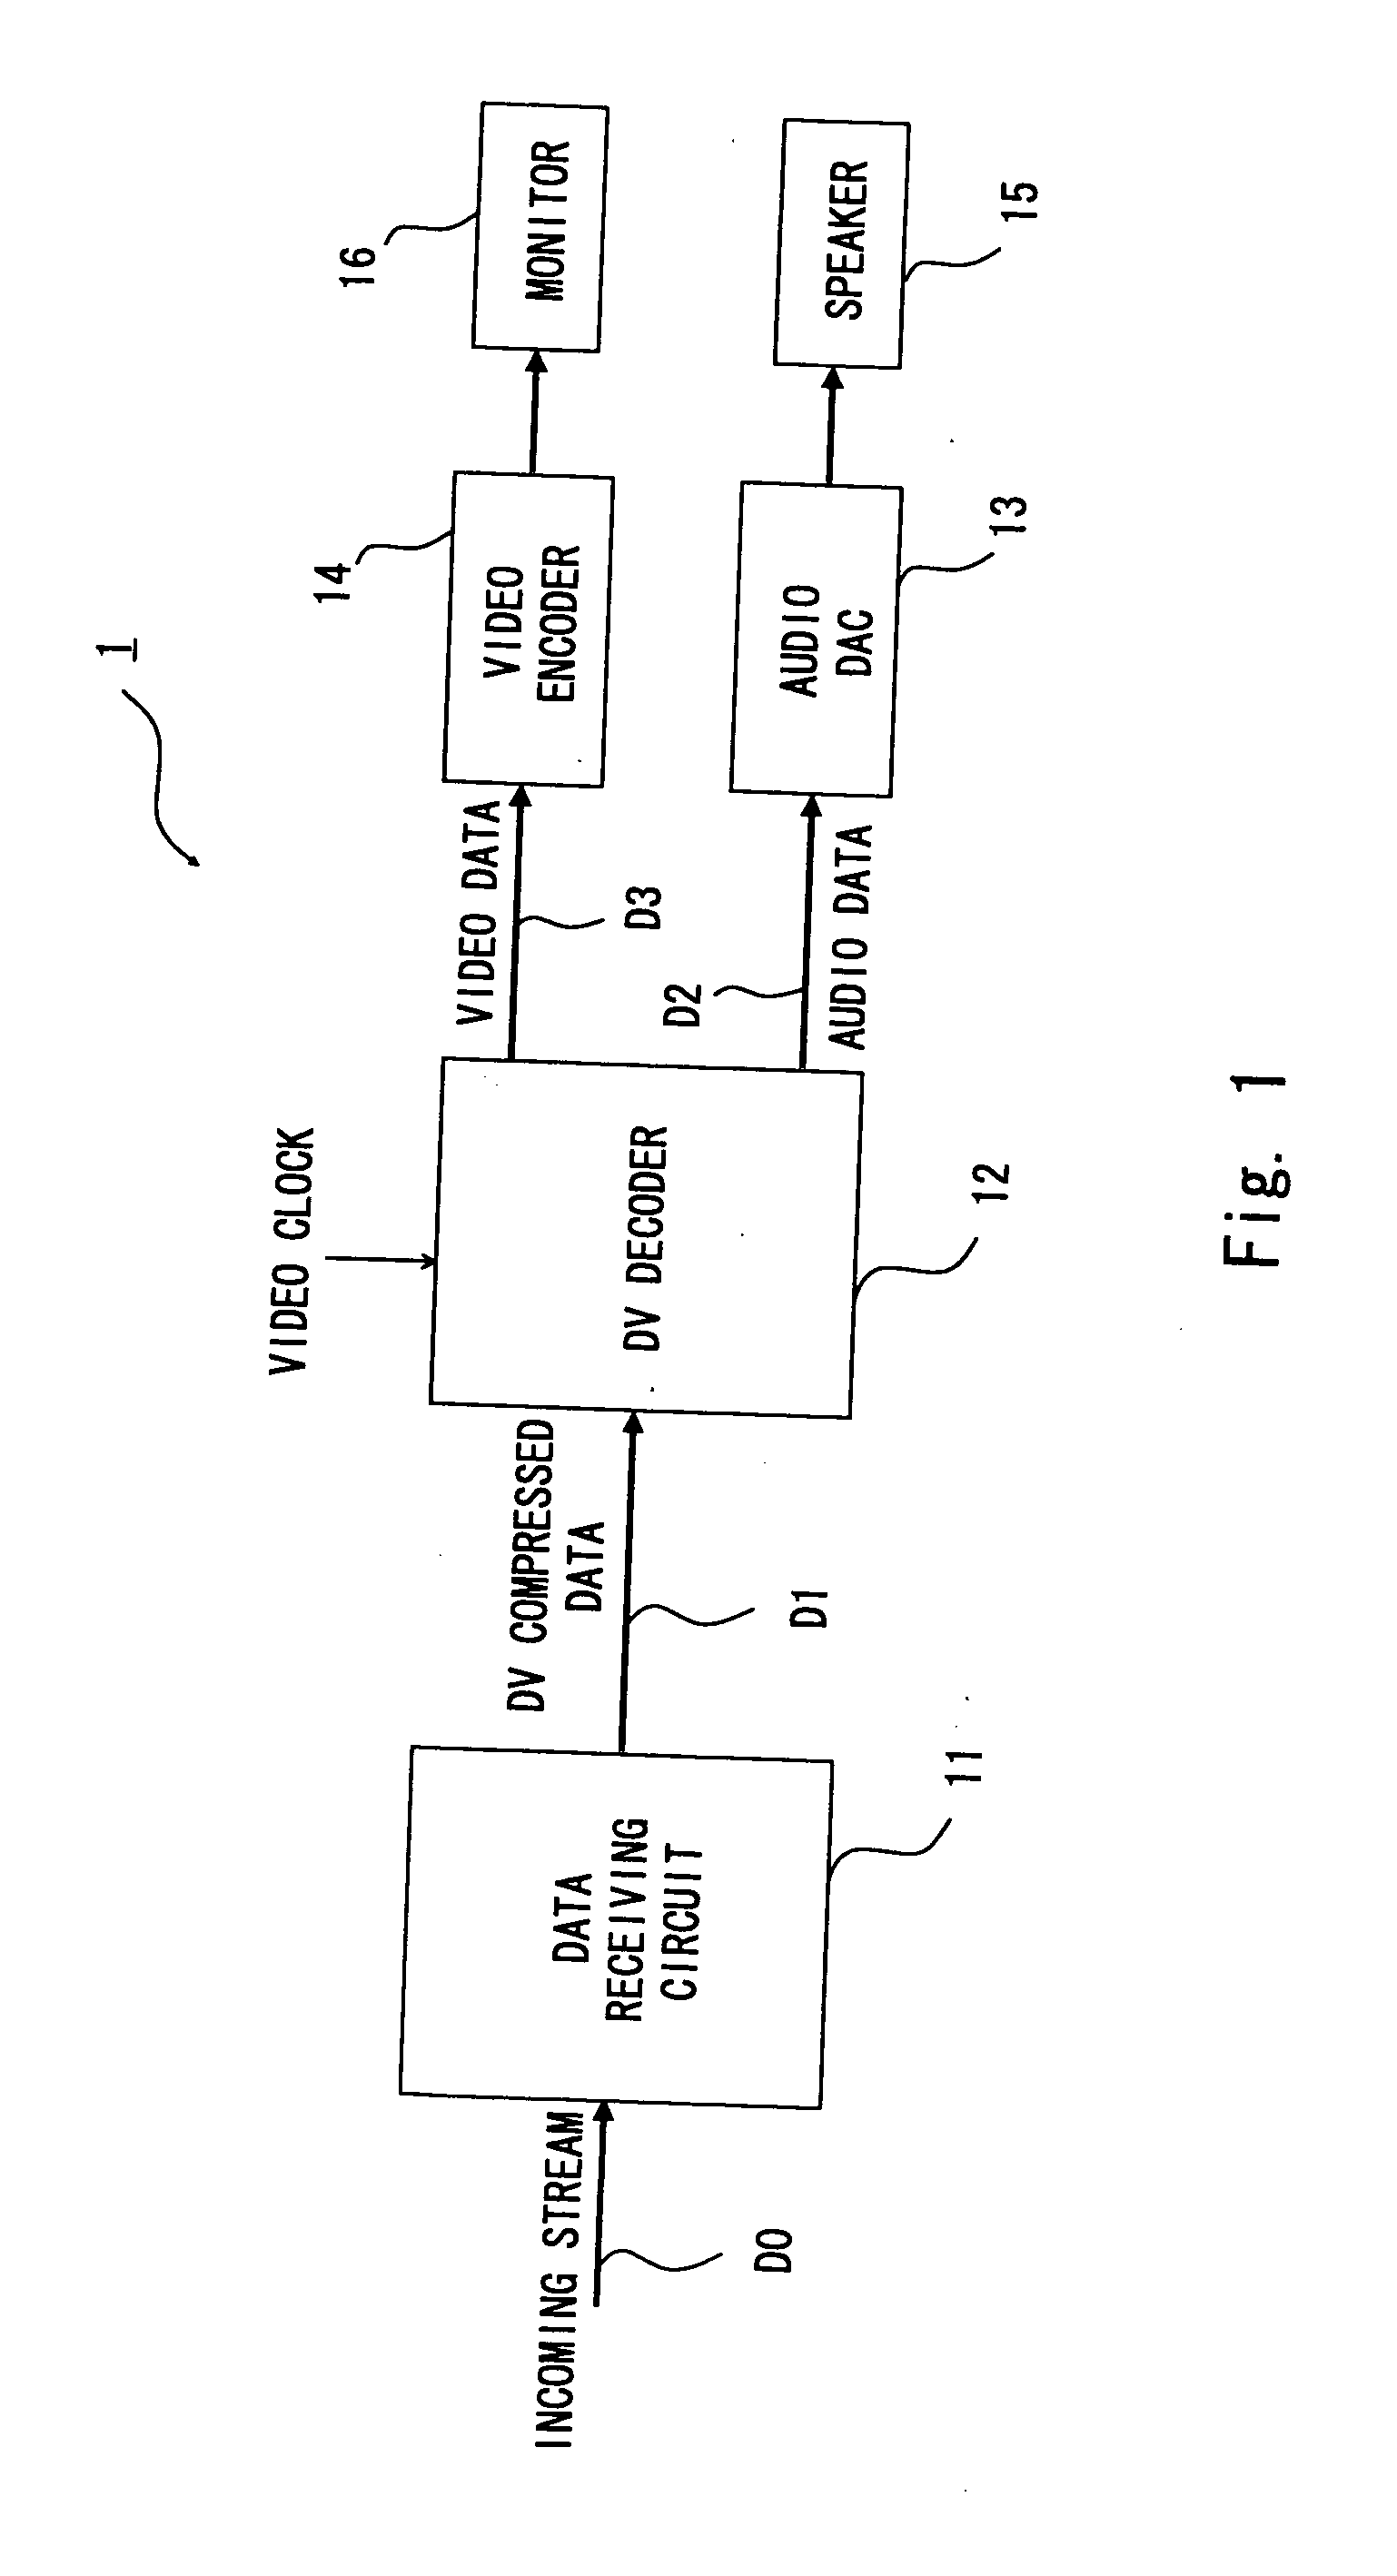 Reference clock recovery circuit and data receiving apparatus